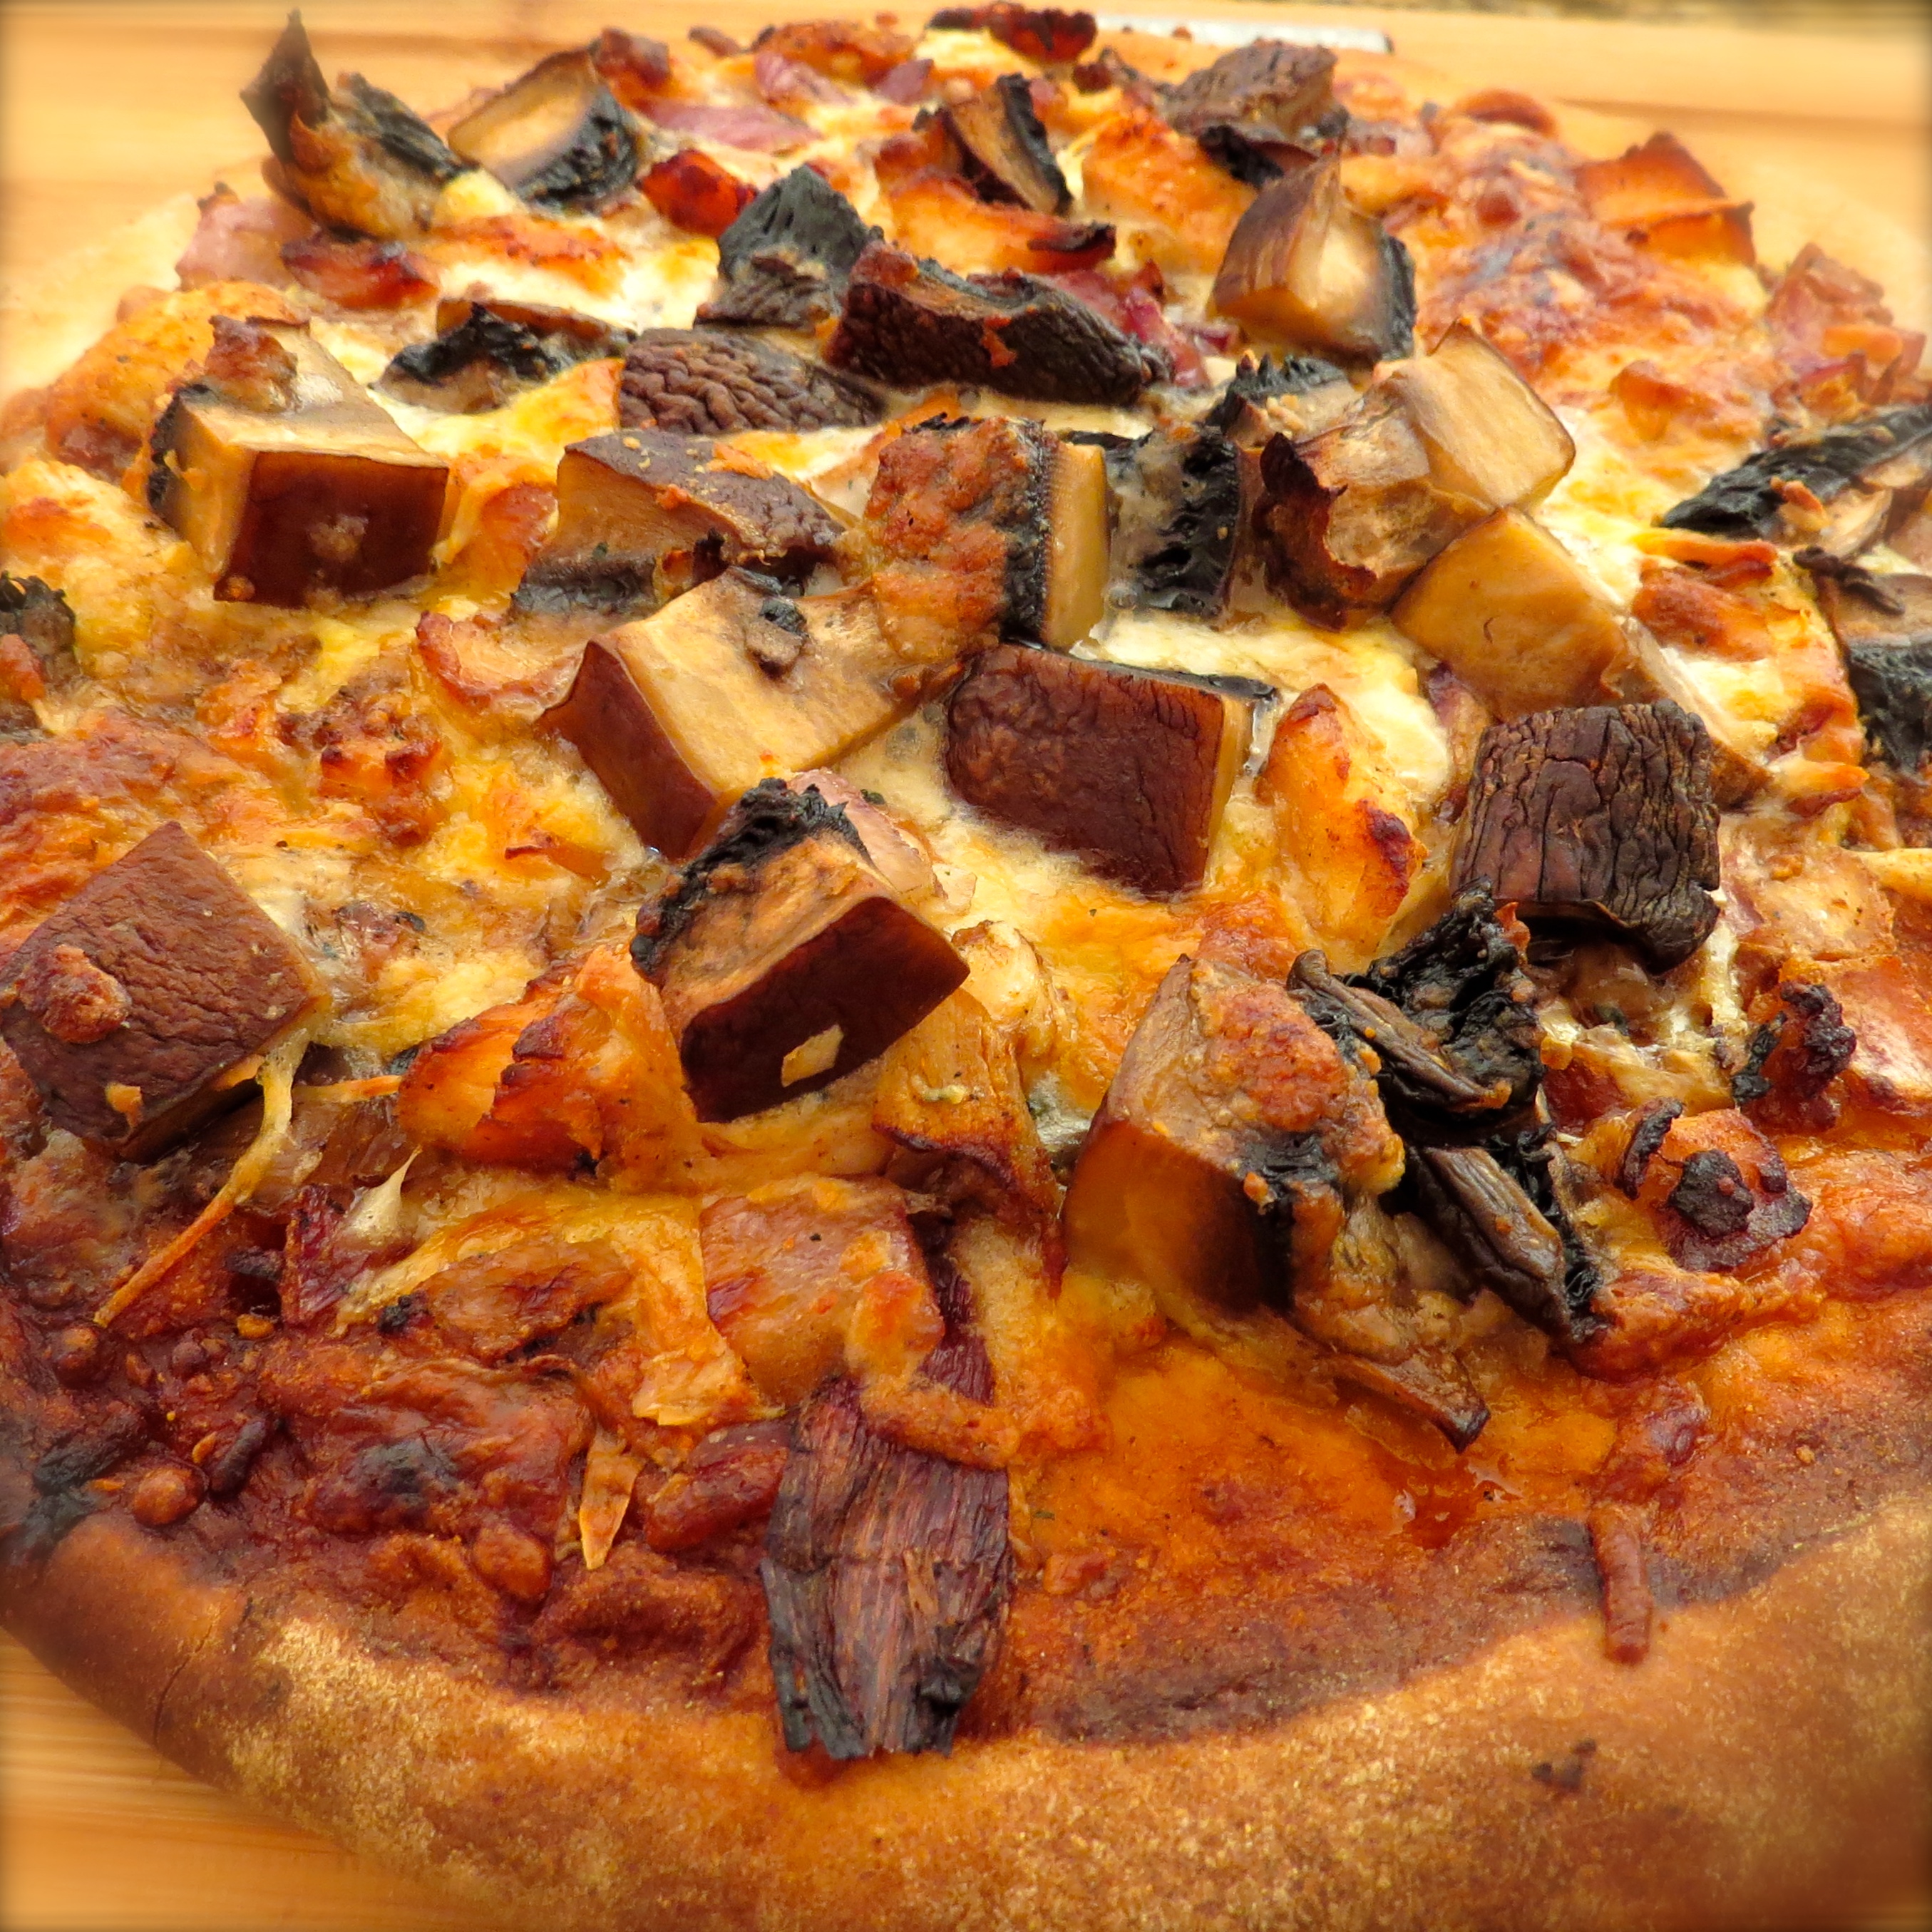 I added the leftover Portobello to last week-end's pizza.